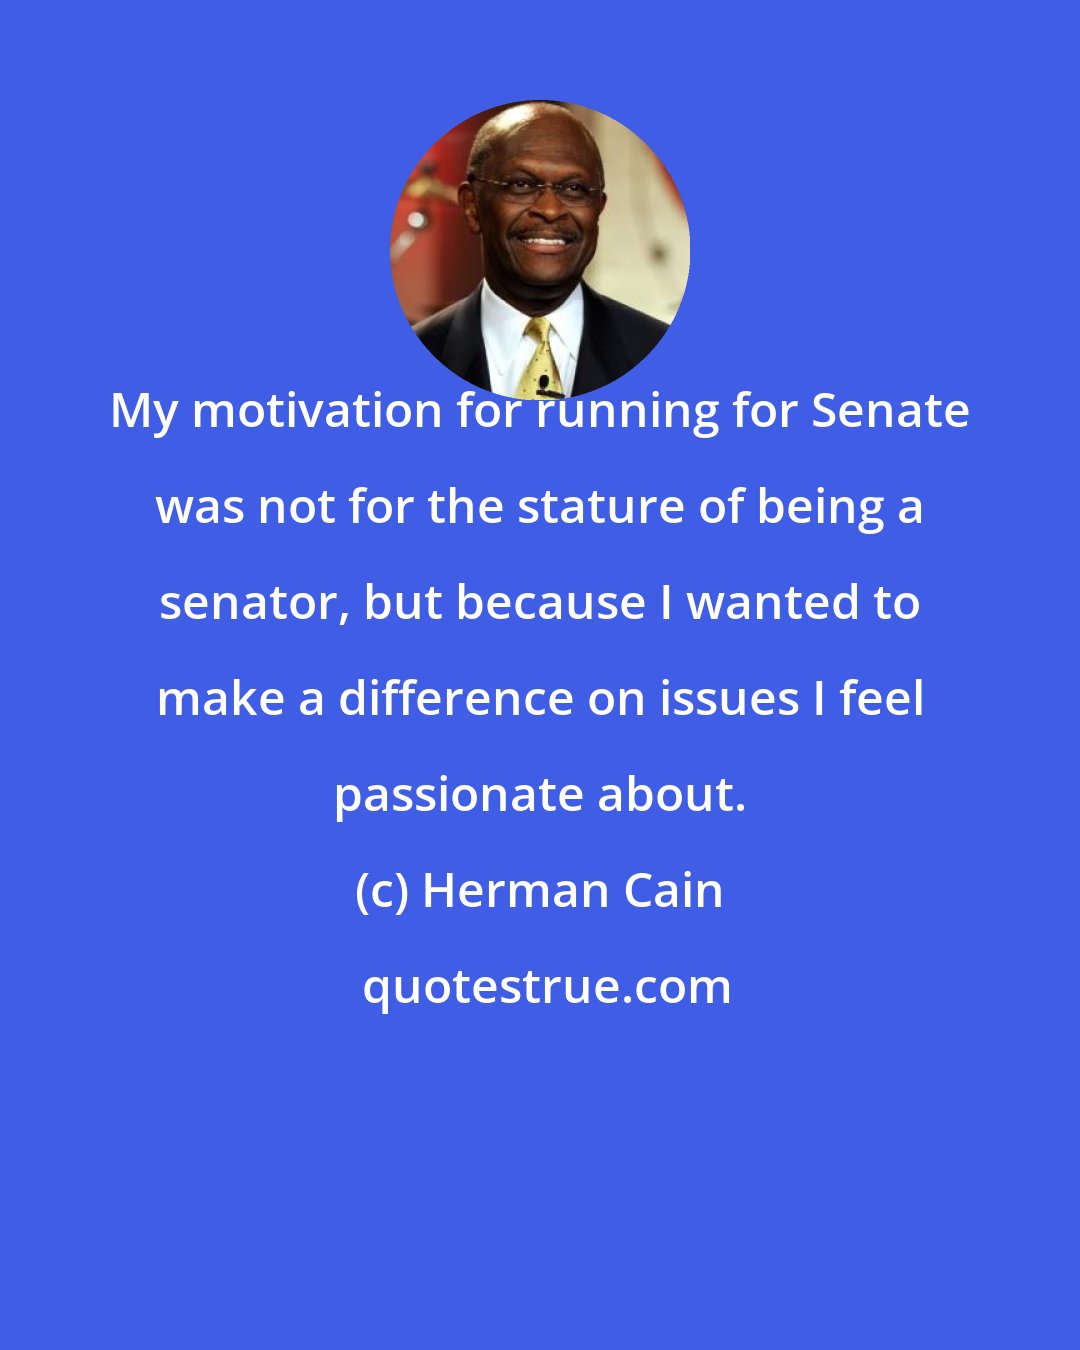 Herman Cain: My motivation for running for Senate was not for the stature of being a senator, but because I wanted to make a difference on issues I feel passionate about.